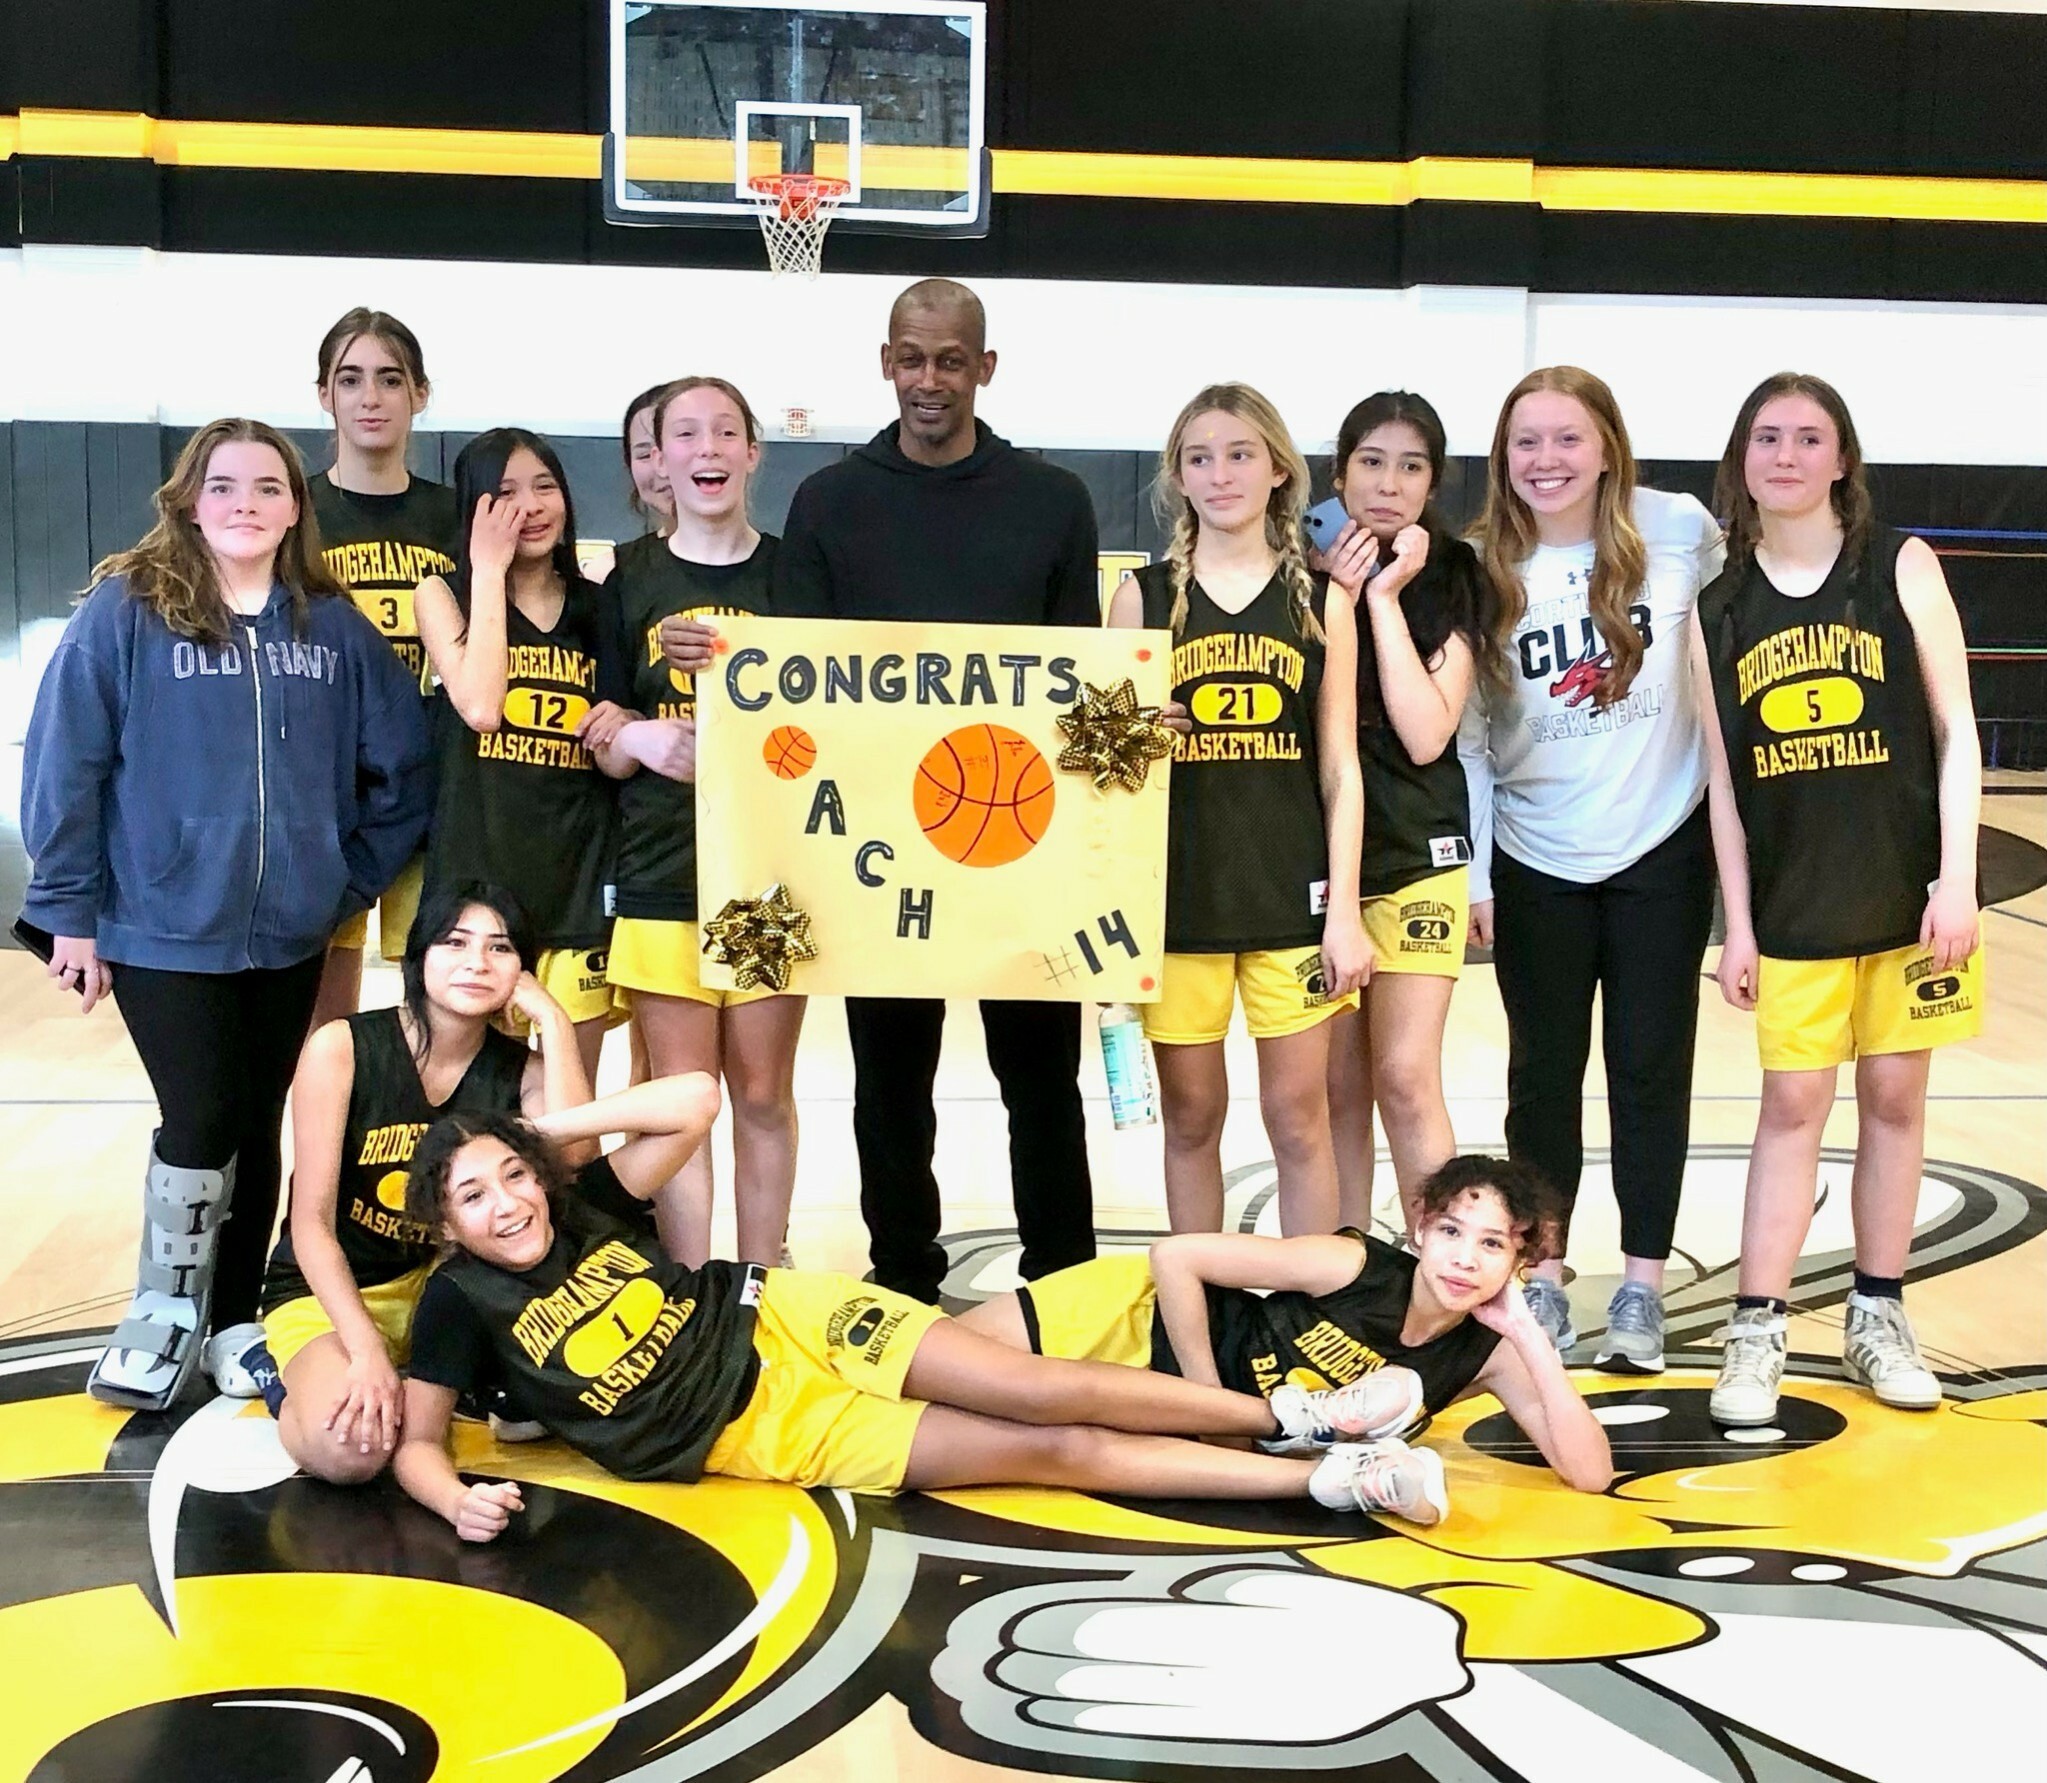 The Bridgehampton junior high girls basketball team, which Carl Johnson is the head coach of this season, congratulated him on his New York State Basketball Hall of Fame induction.